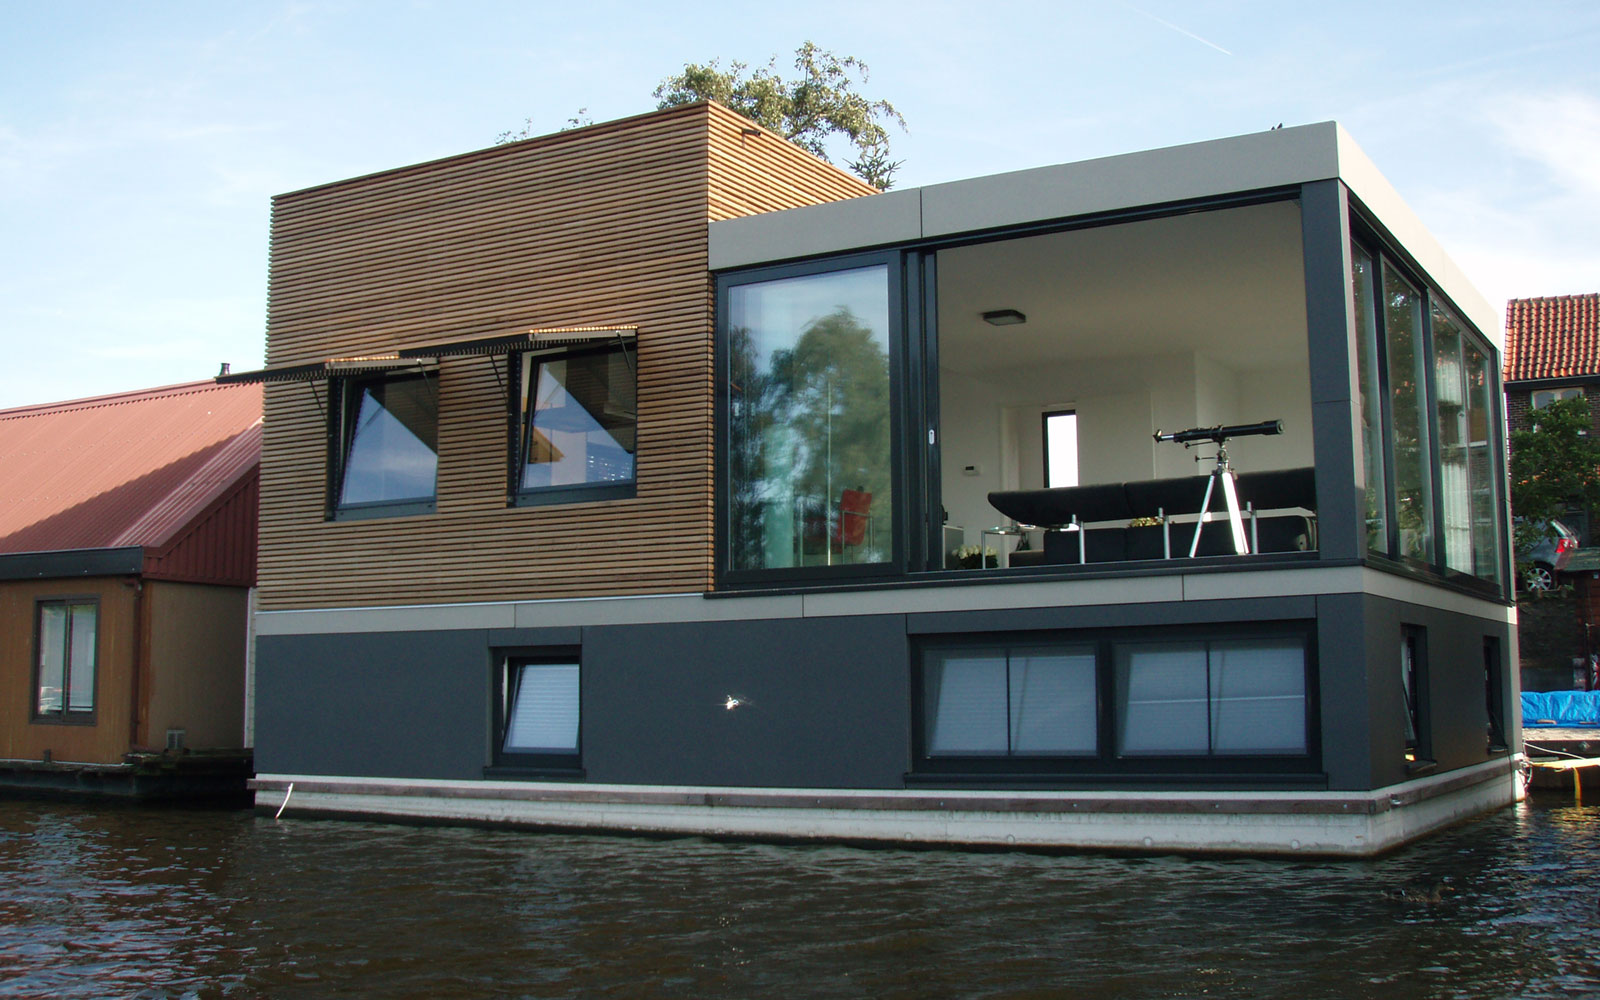 Private Watervilla, The Netherlands